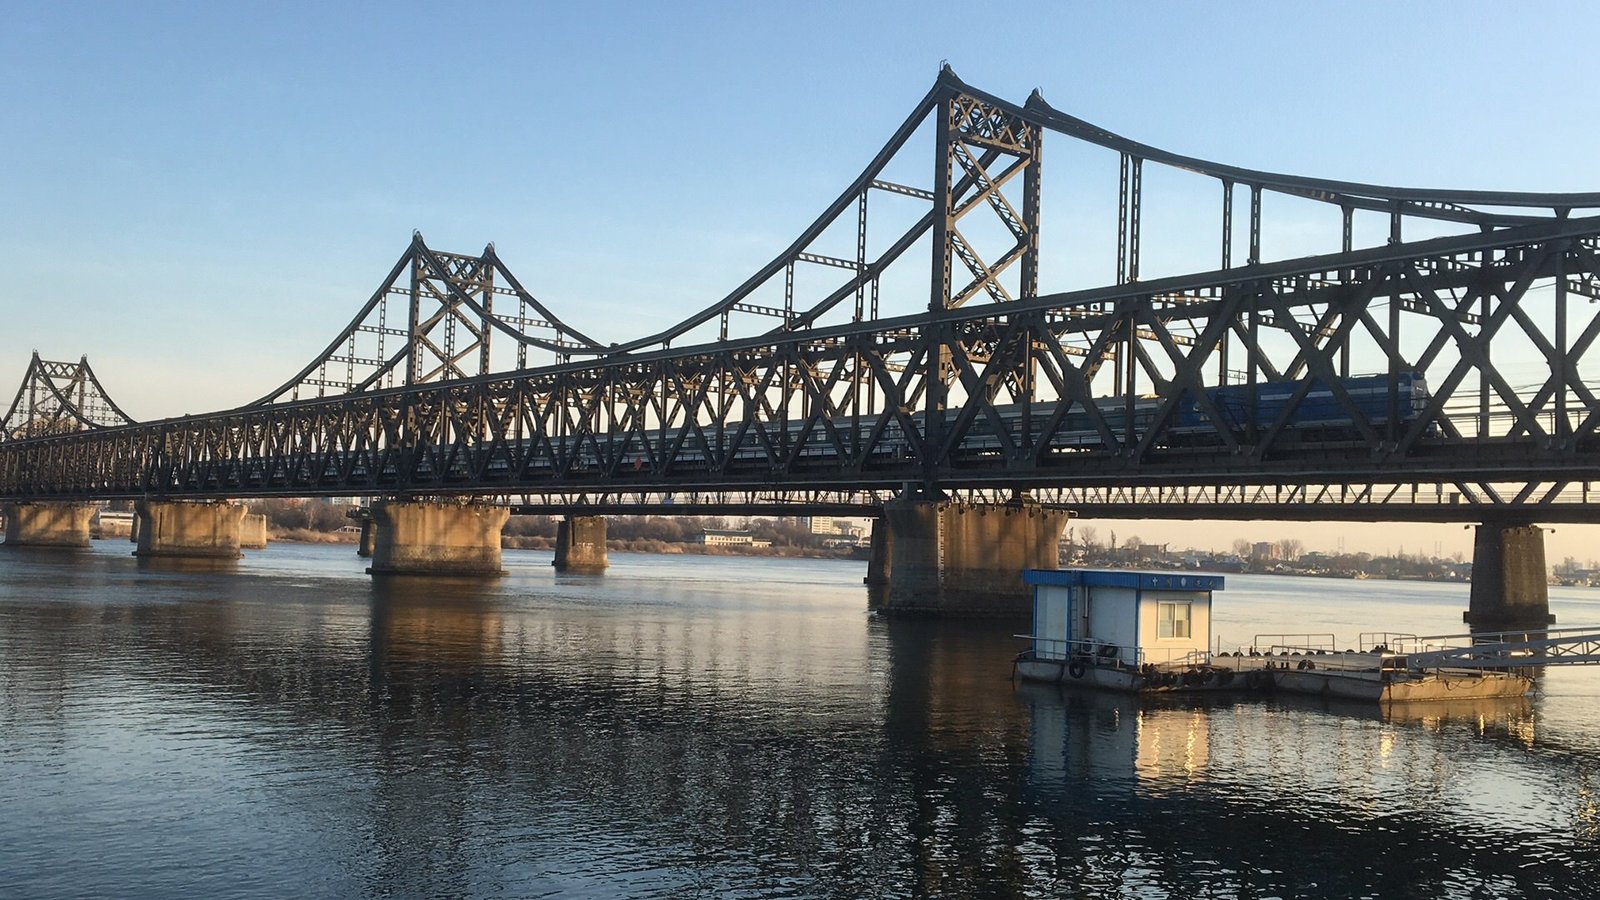 The Sino-North Korean Friendship Bridge, which connects the Chinese city of Dandong with the North Korean city of Sinuiju.